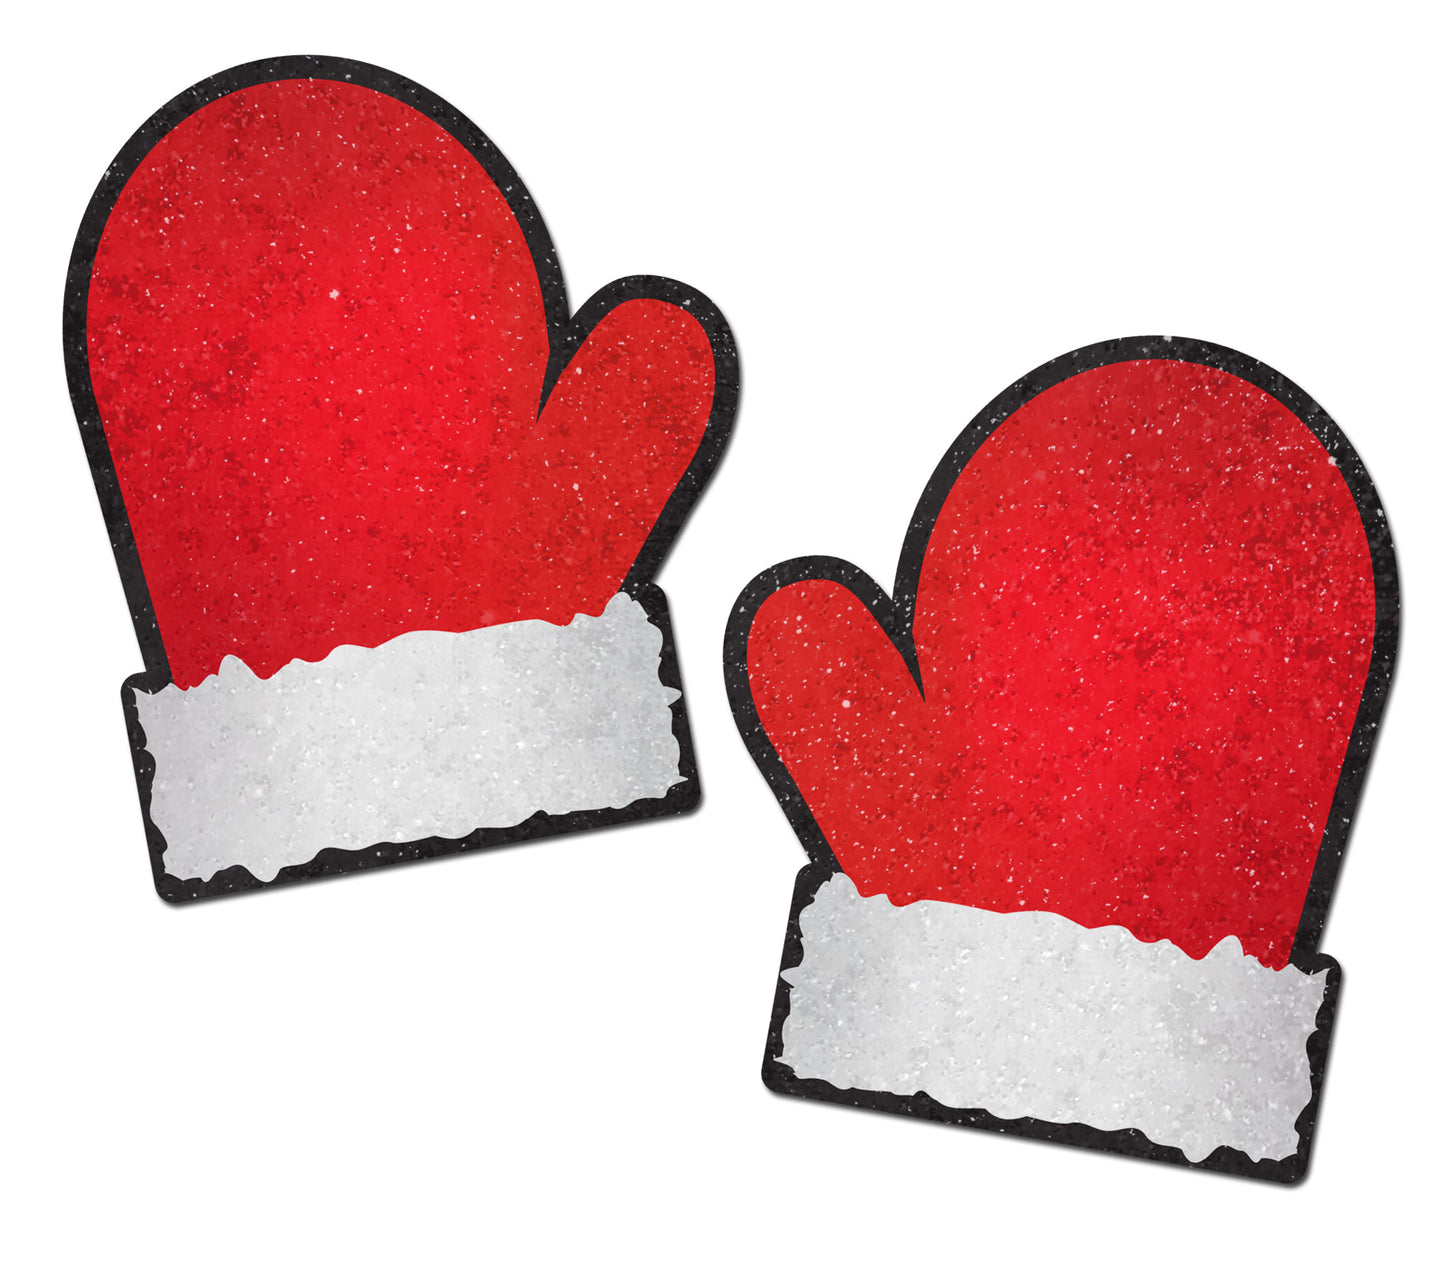 Santa: Red and White Santa Mitten Nipple Pasties by Pastease® o-s